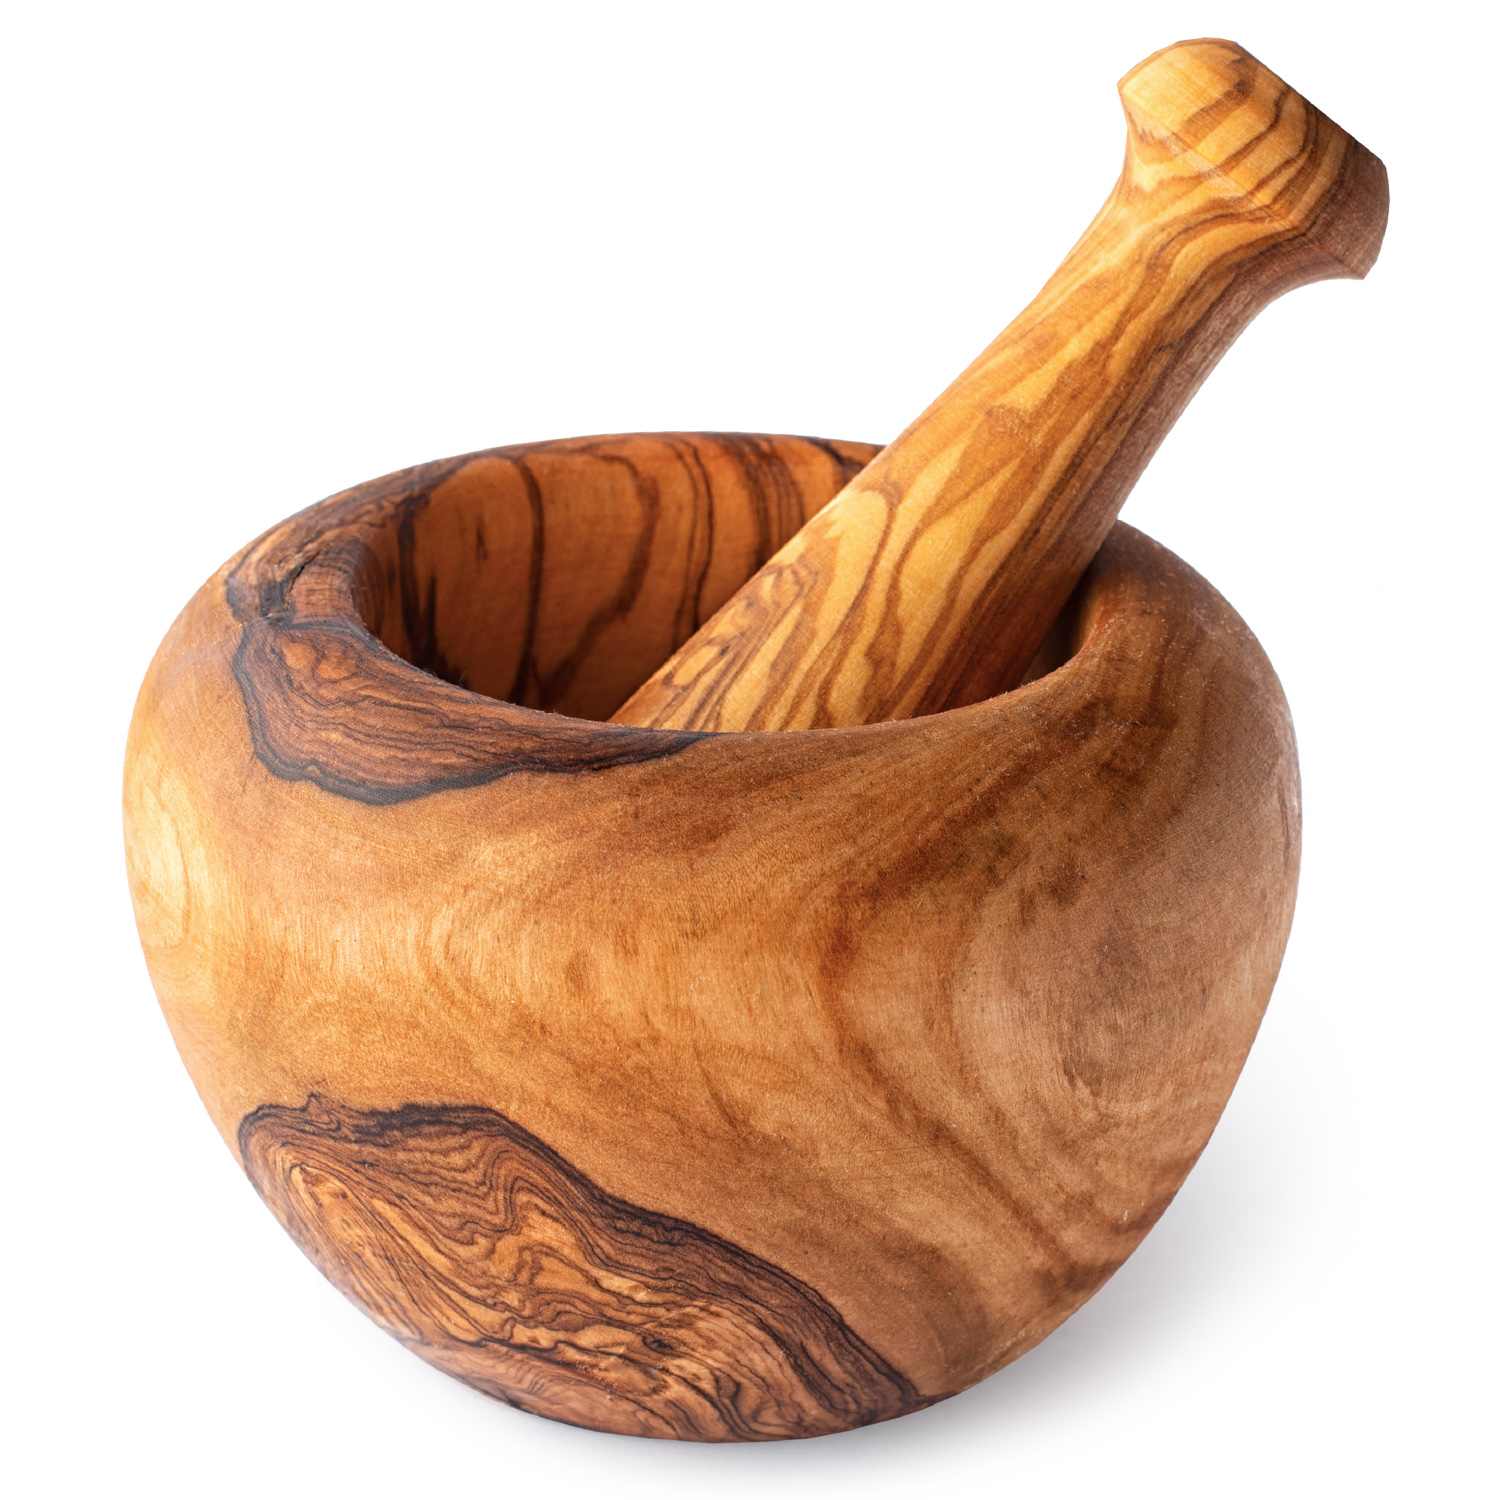 Wood Mortar and Pestle from Forest Decor